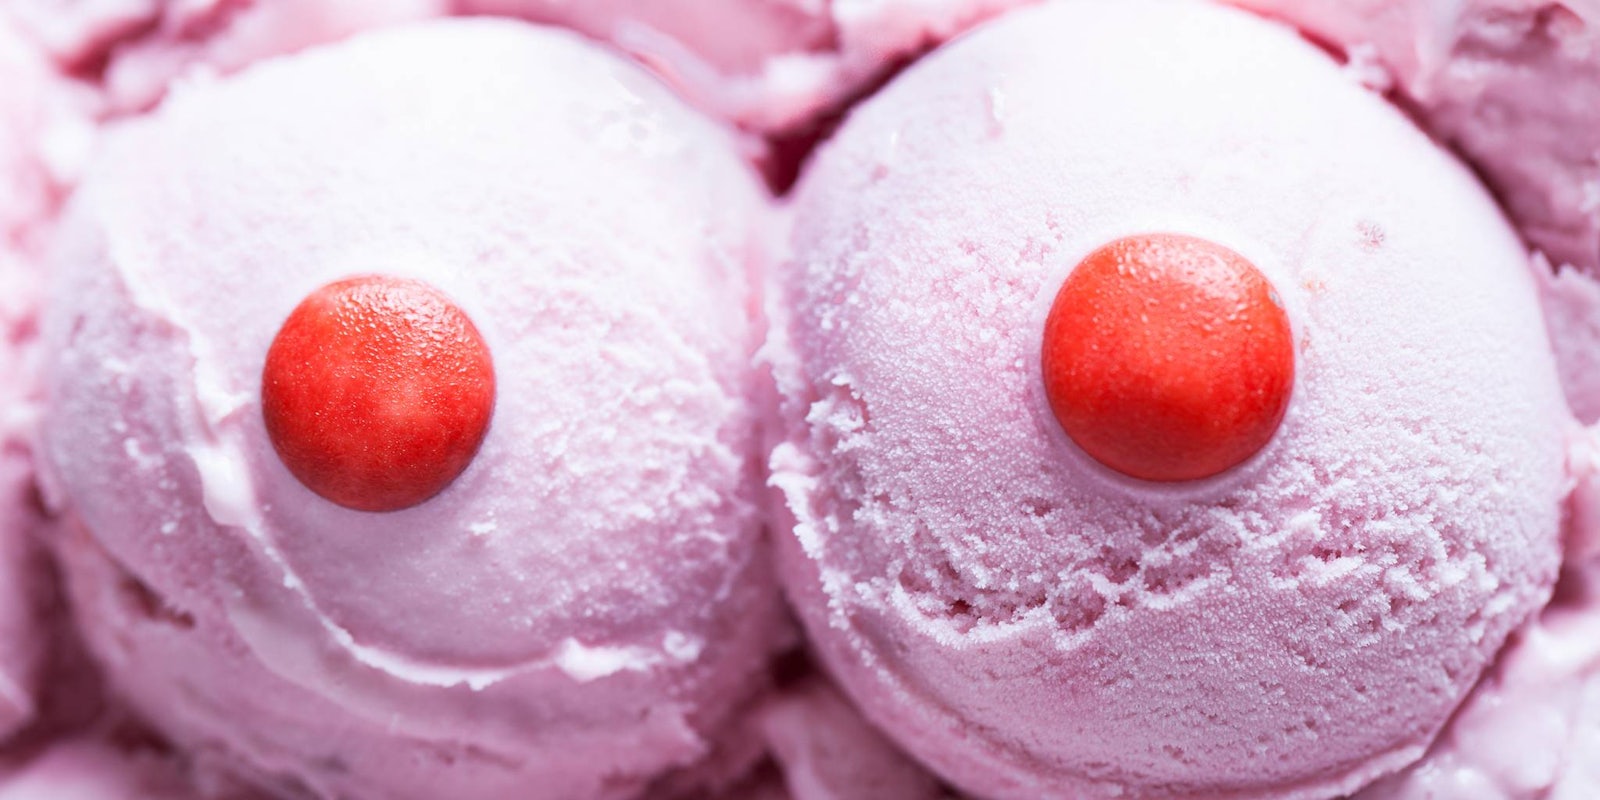 Genderless nipples: A photo of two cupcakes that looks like breasts